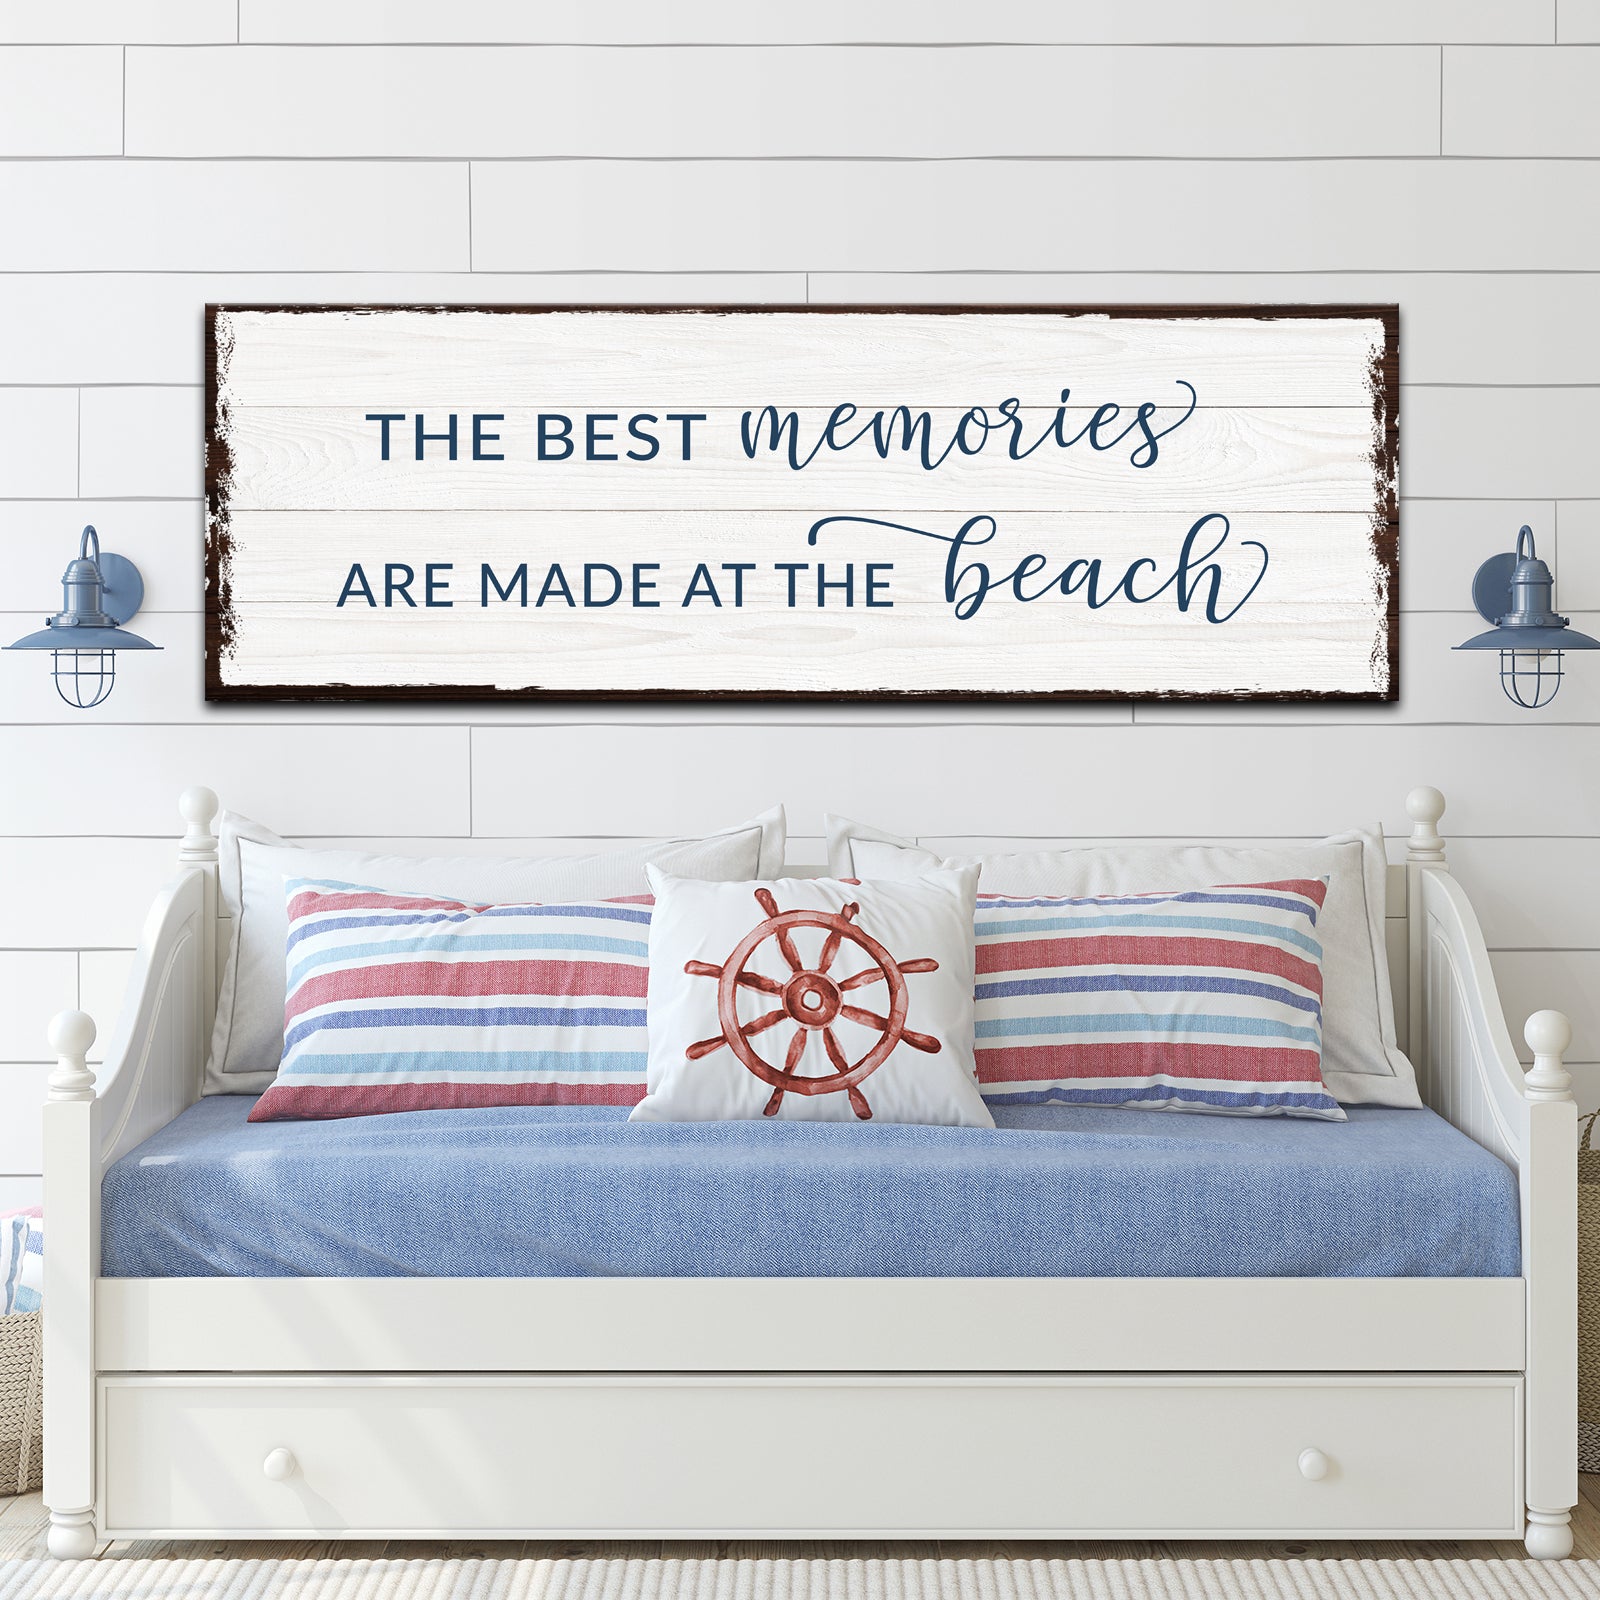 Best Memories at the Beach Sign - Image by Tailored Canvases